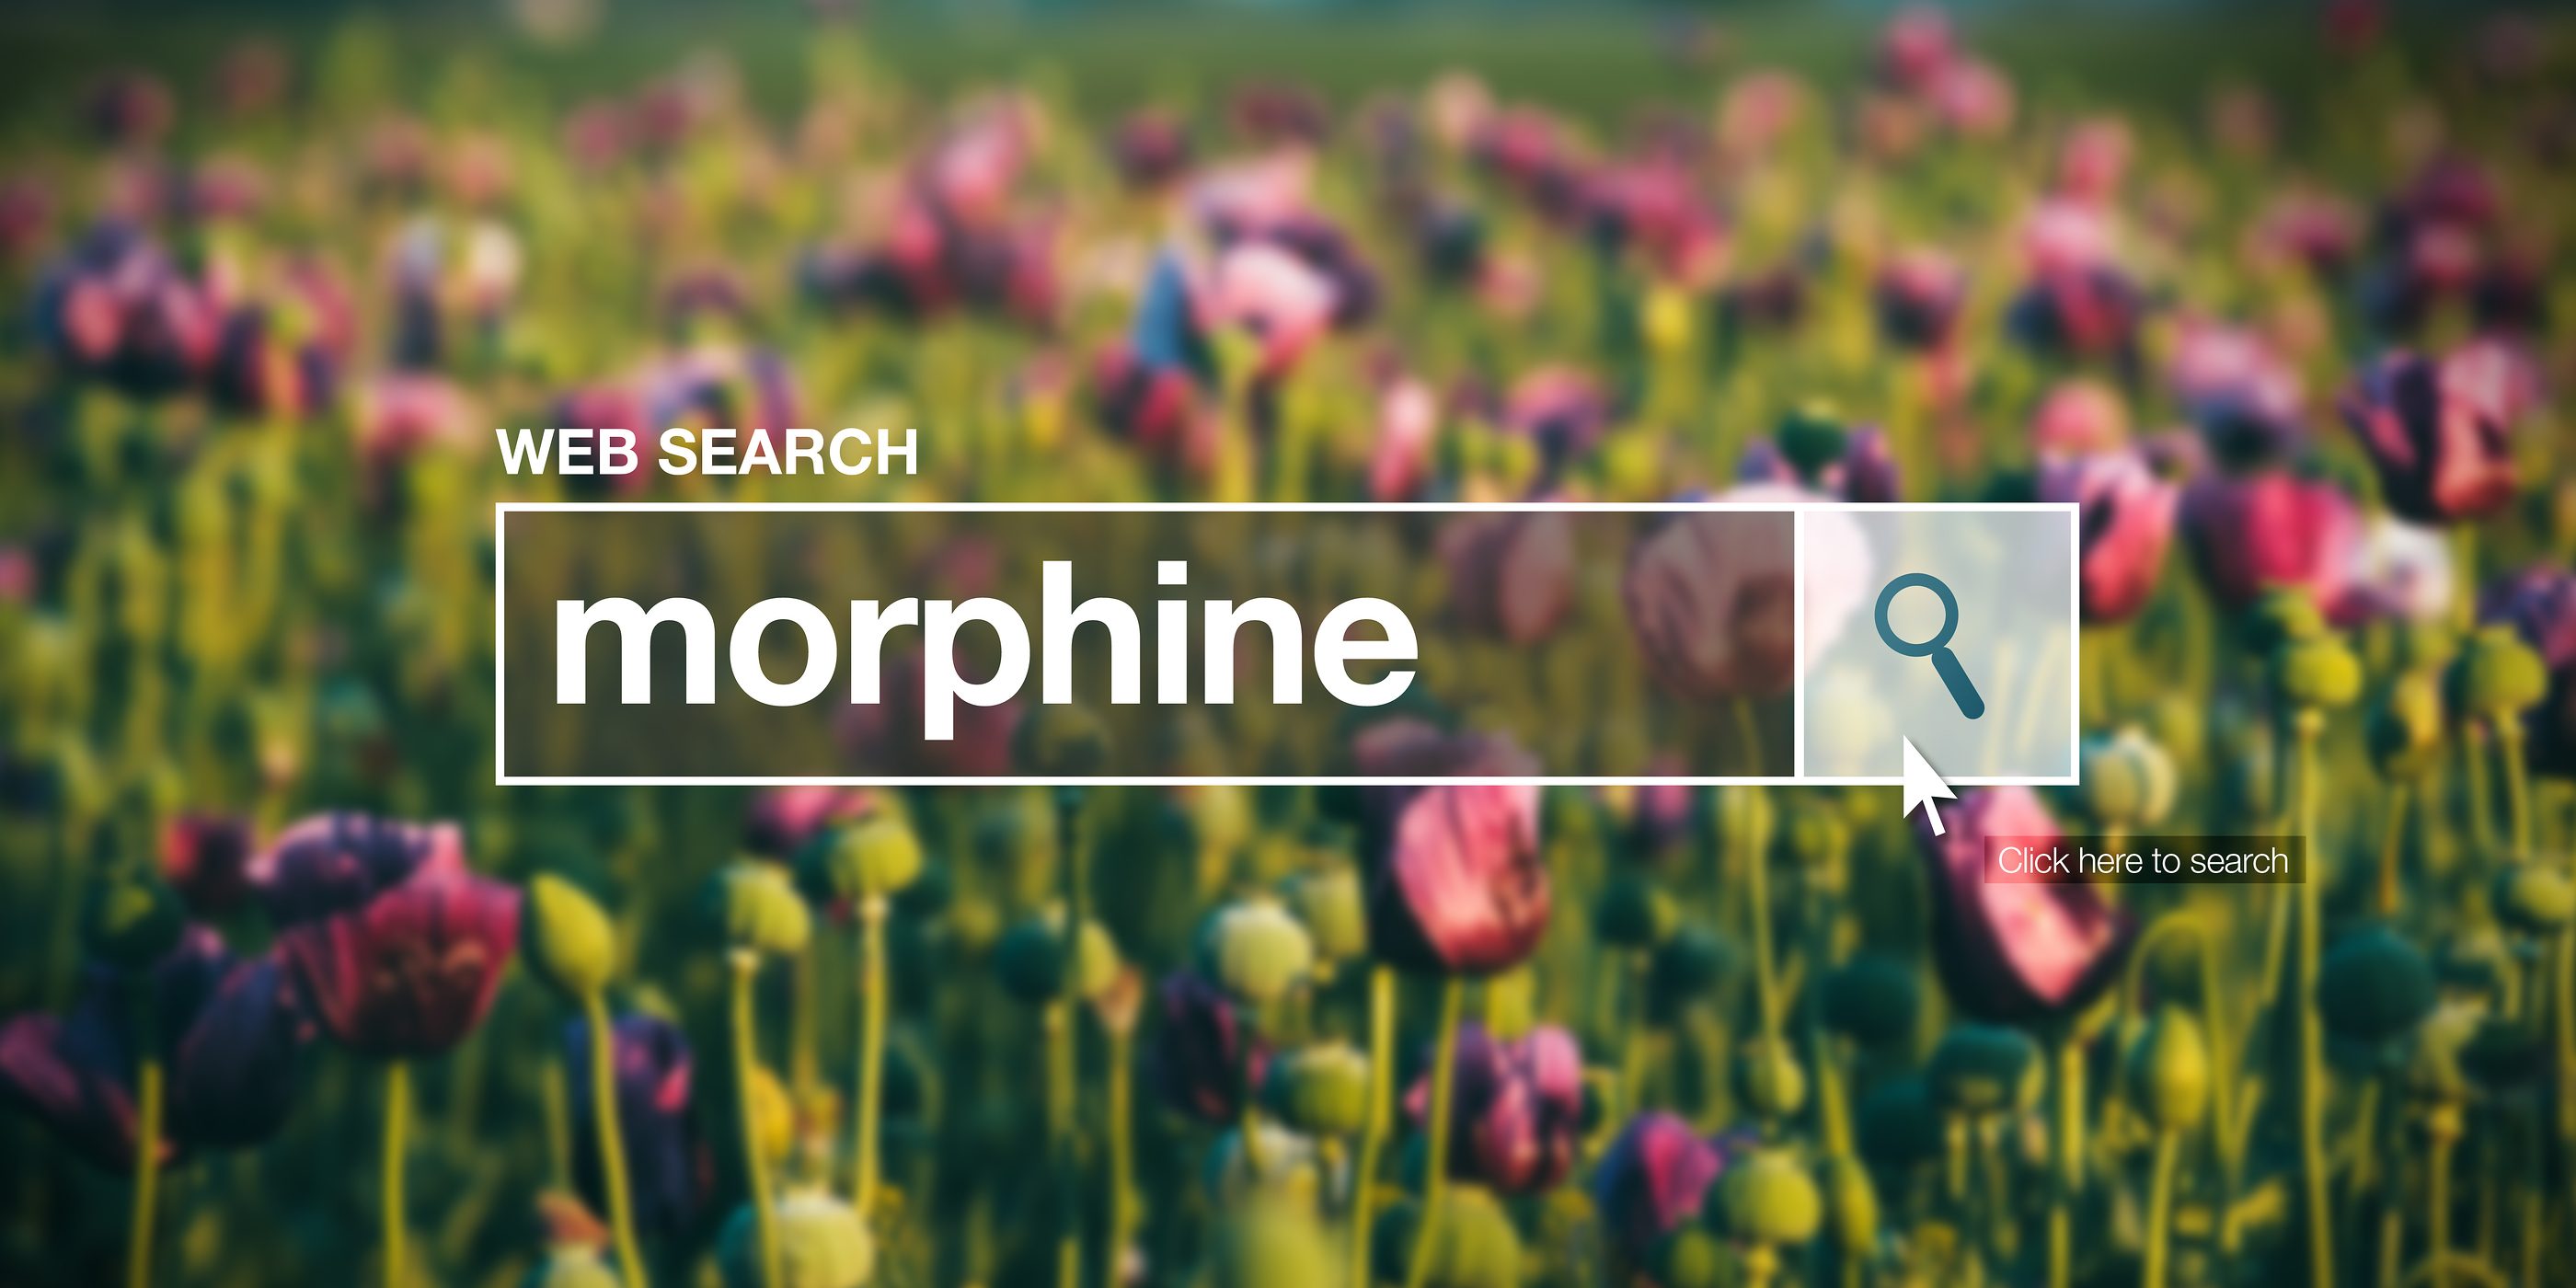 Morphine written in search bar to find morphine detox center